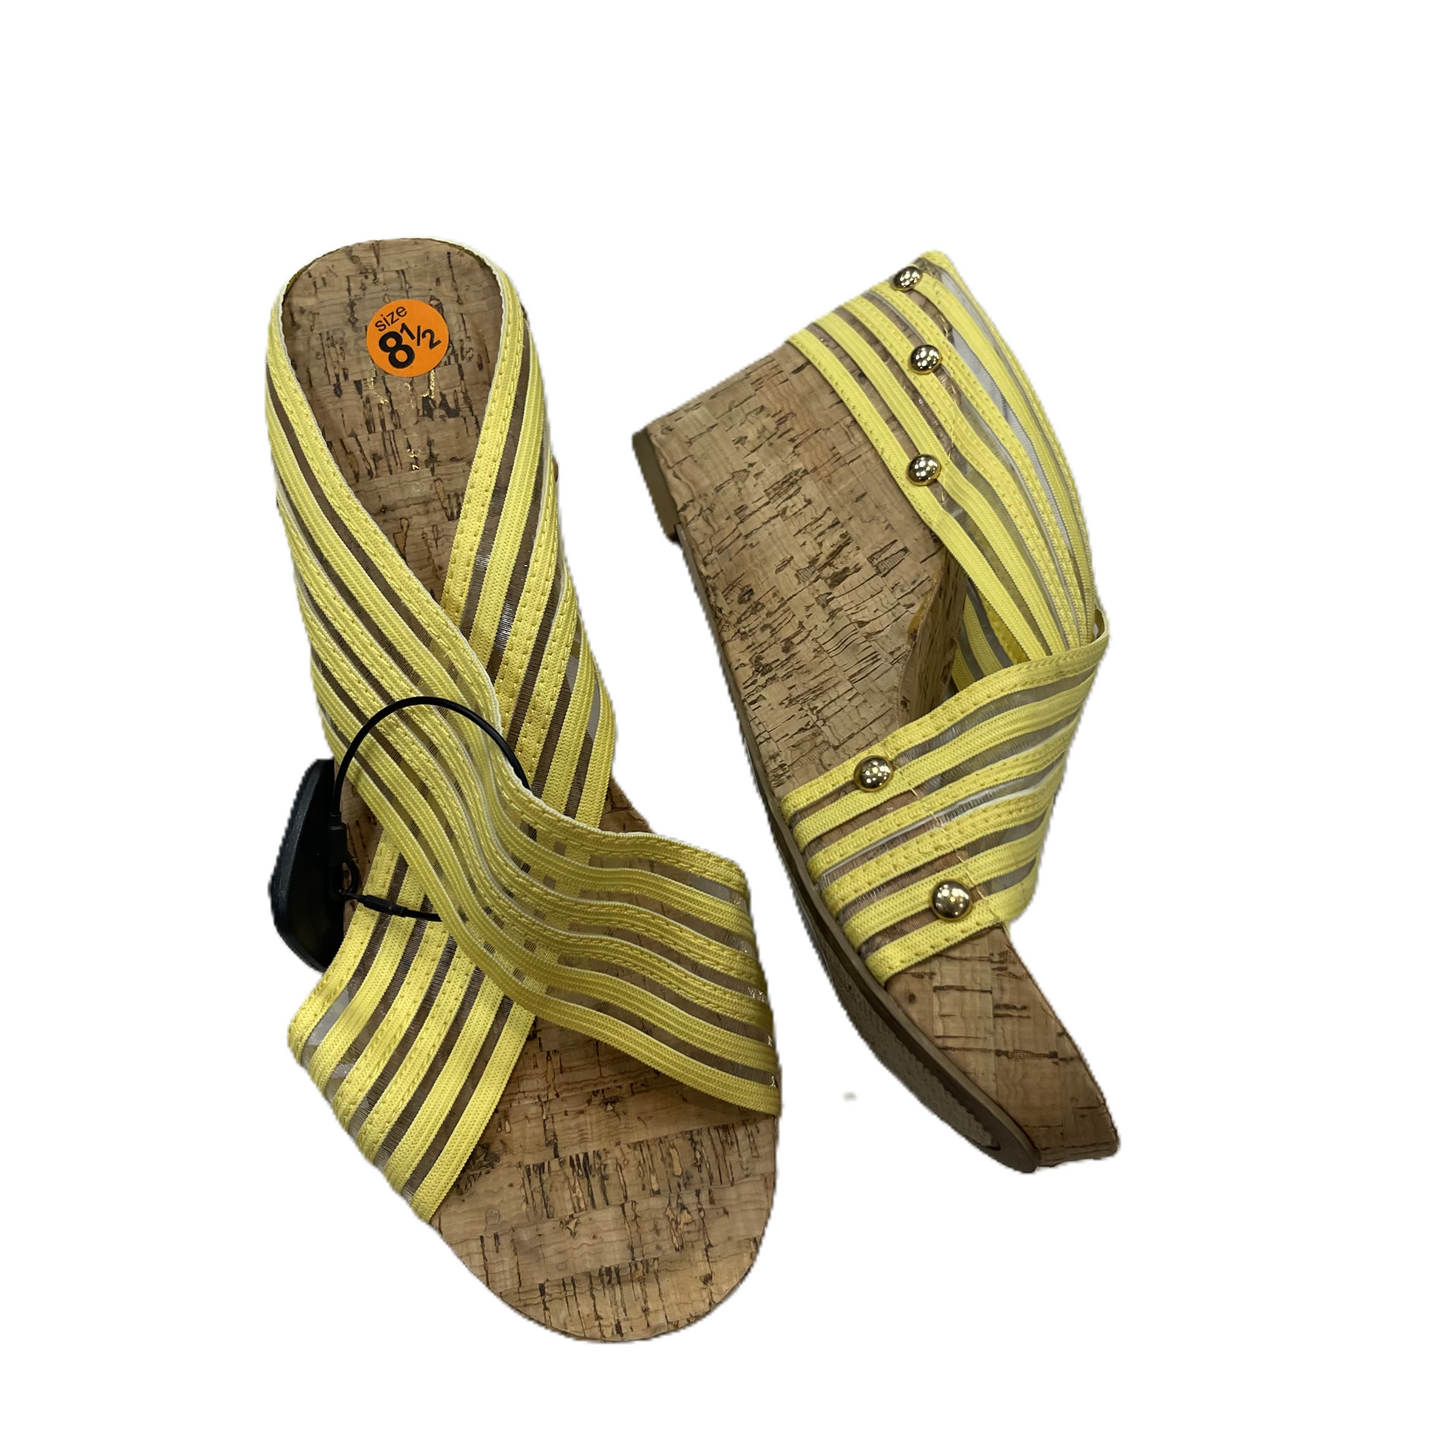 Yellow Sandals Heels Wedge By Cato, Size: 8.5